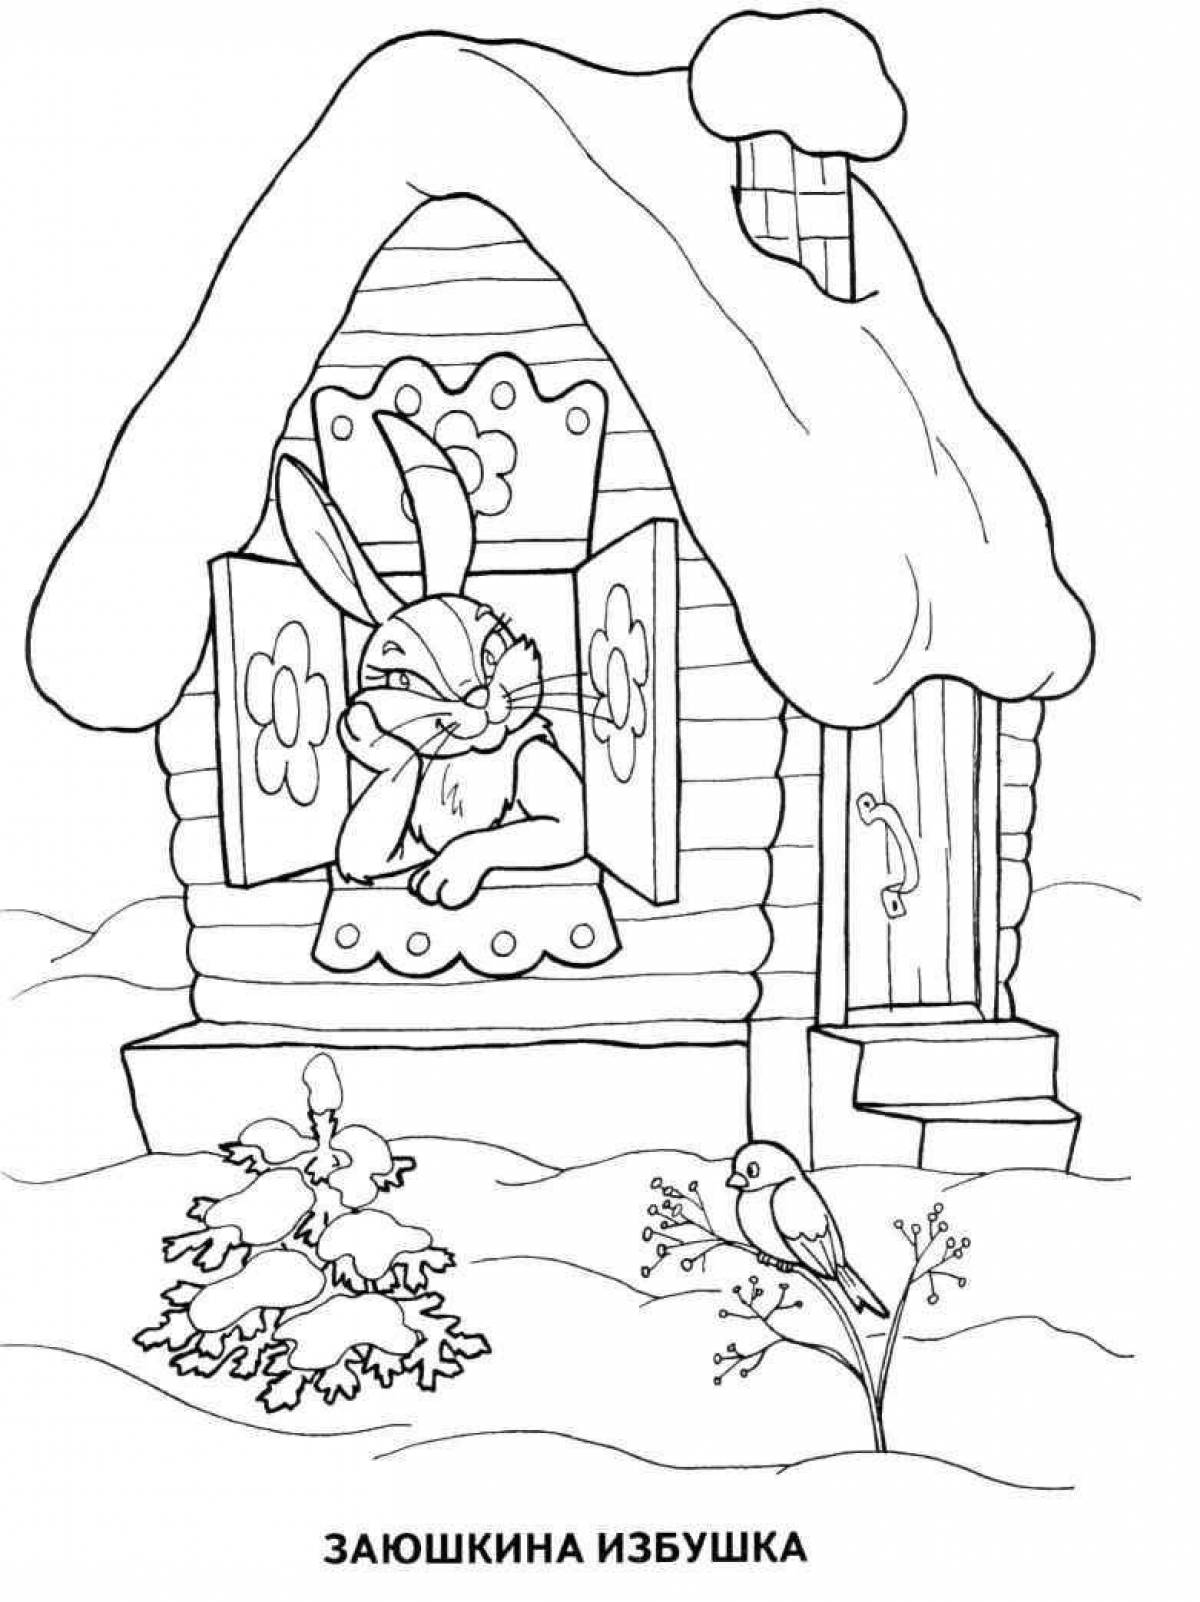 Coloring page funny winter hut